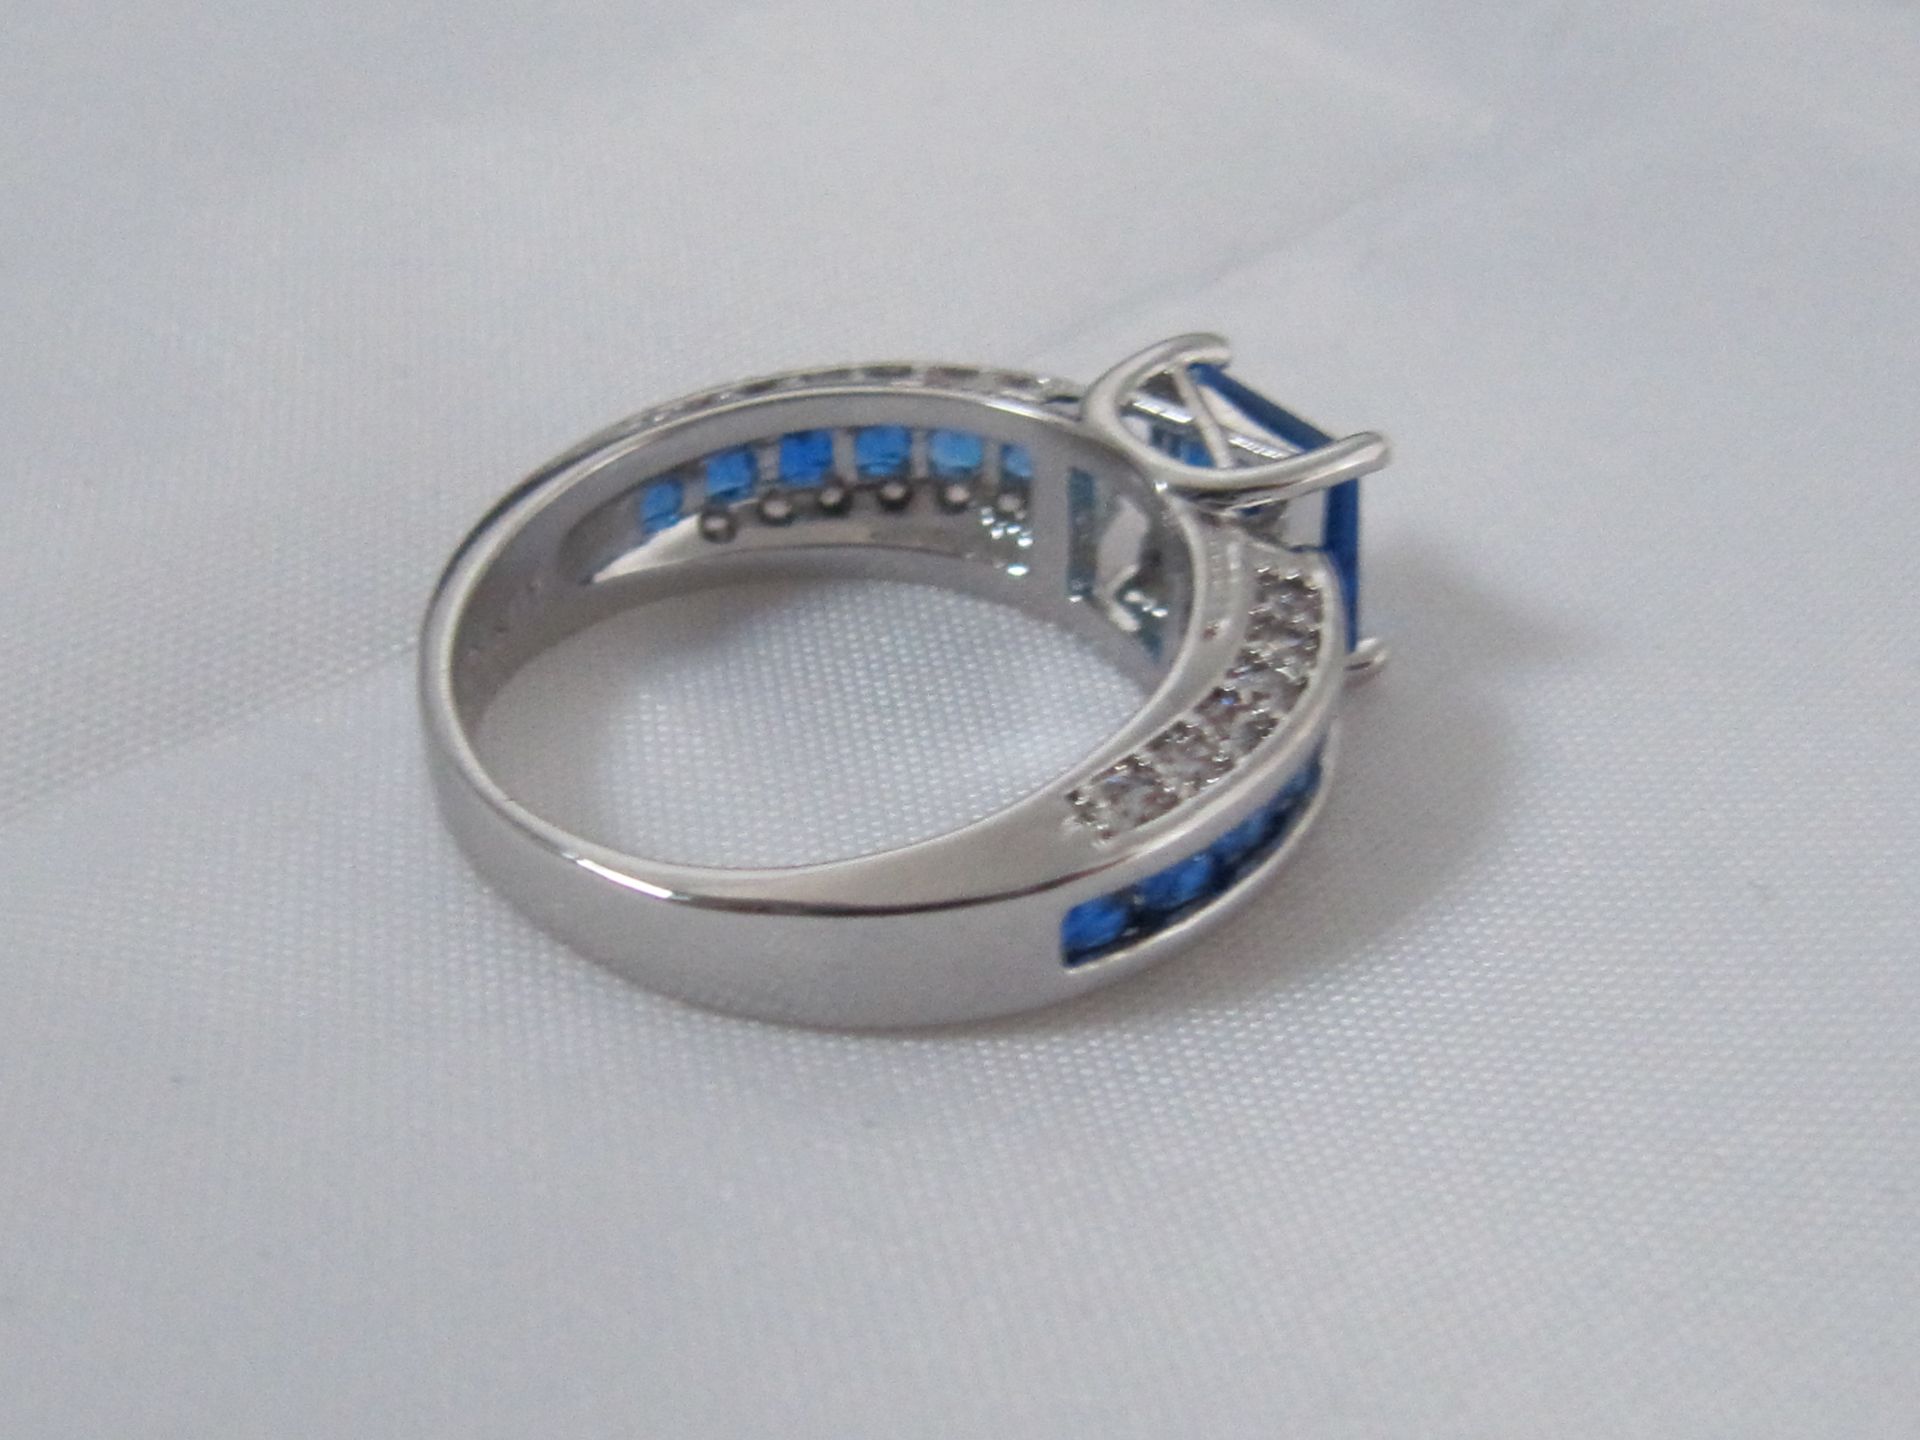 10k White Gold Filled with Blue Sapphires. Size S. - Image 4 of 5